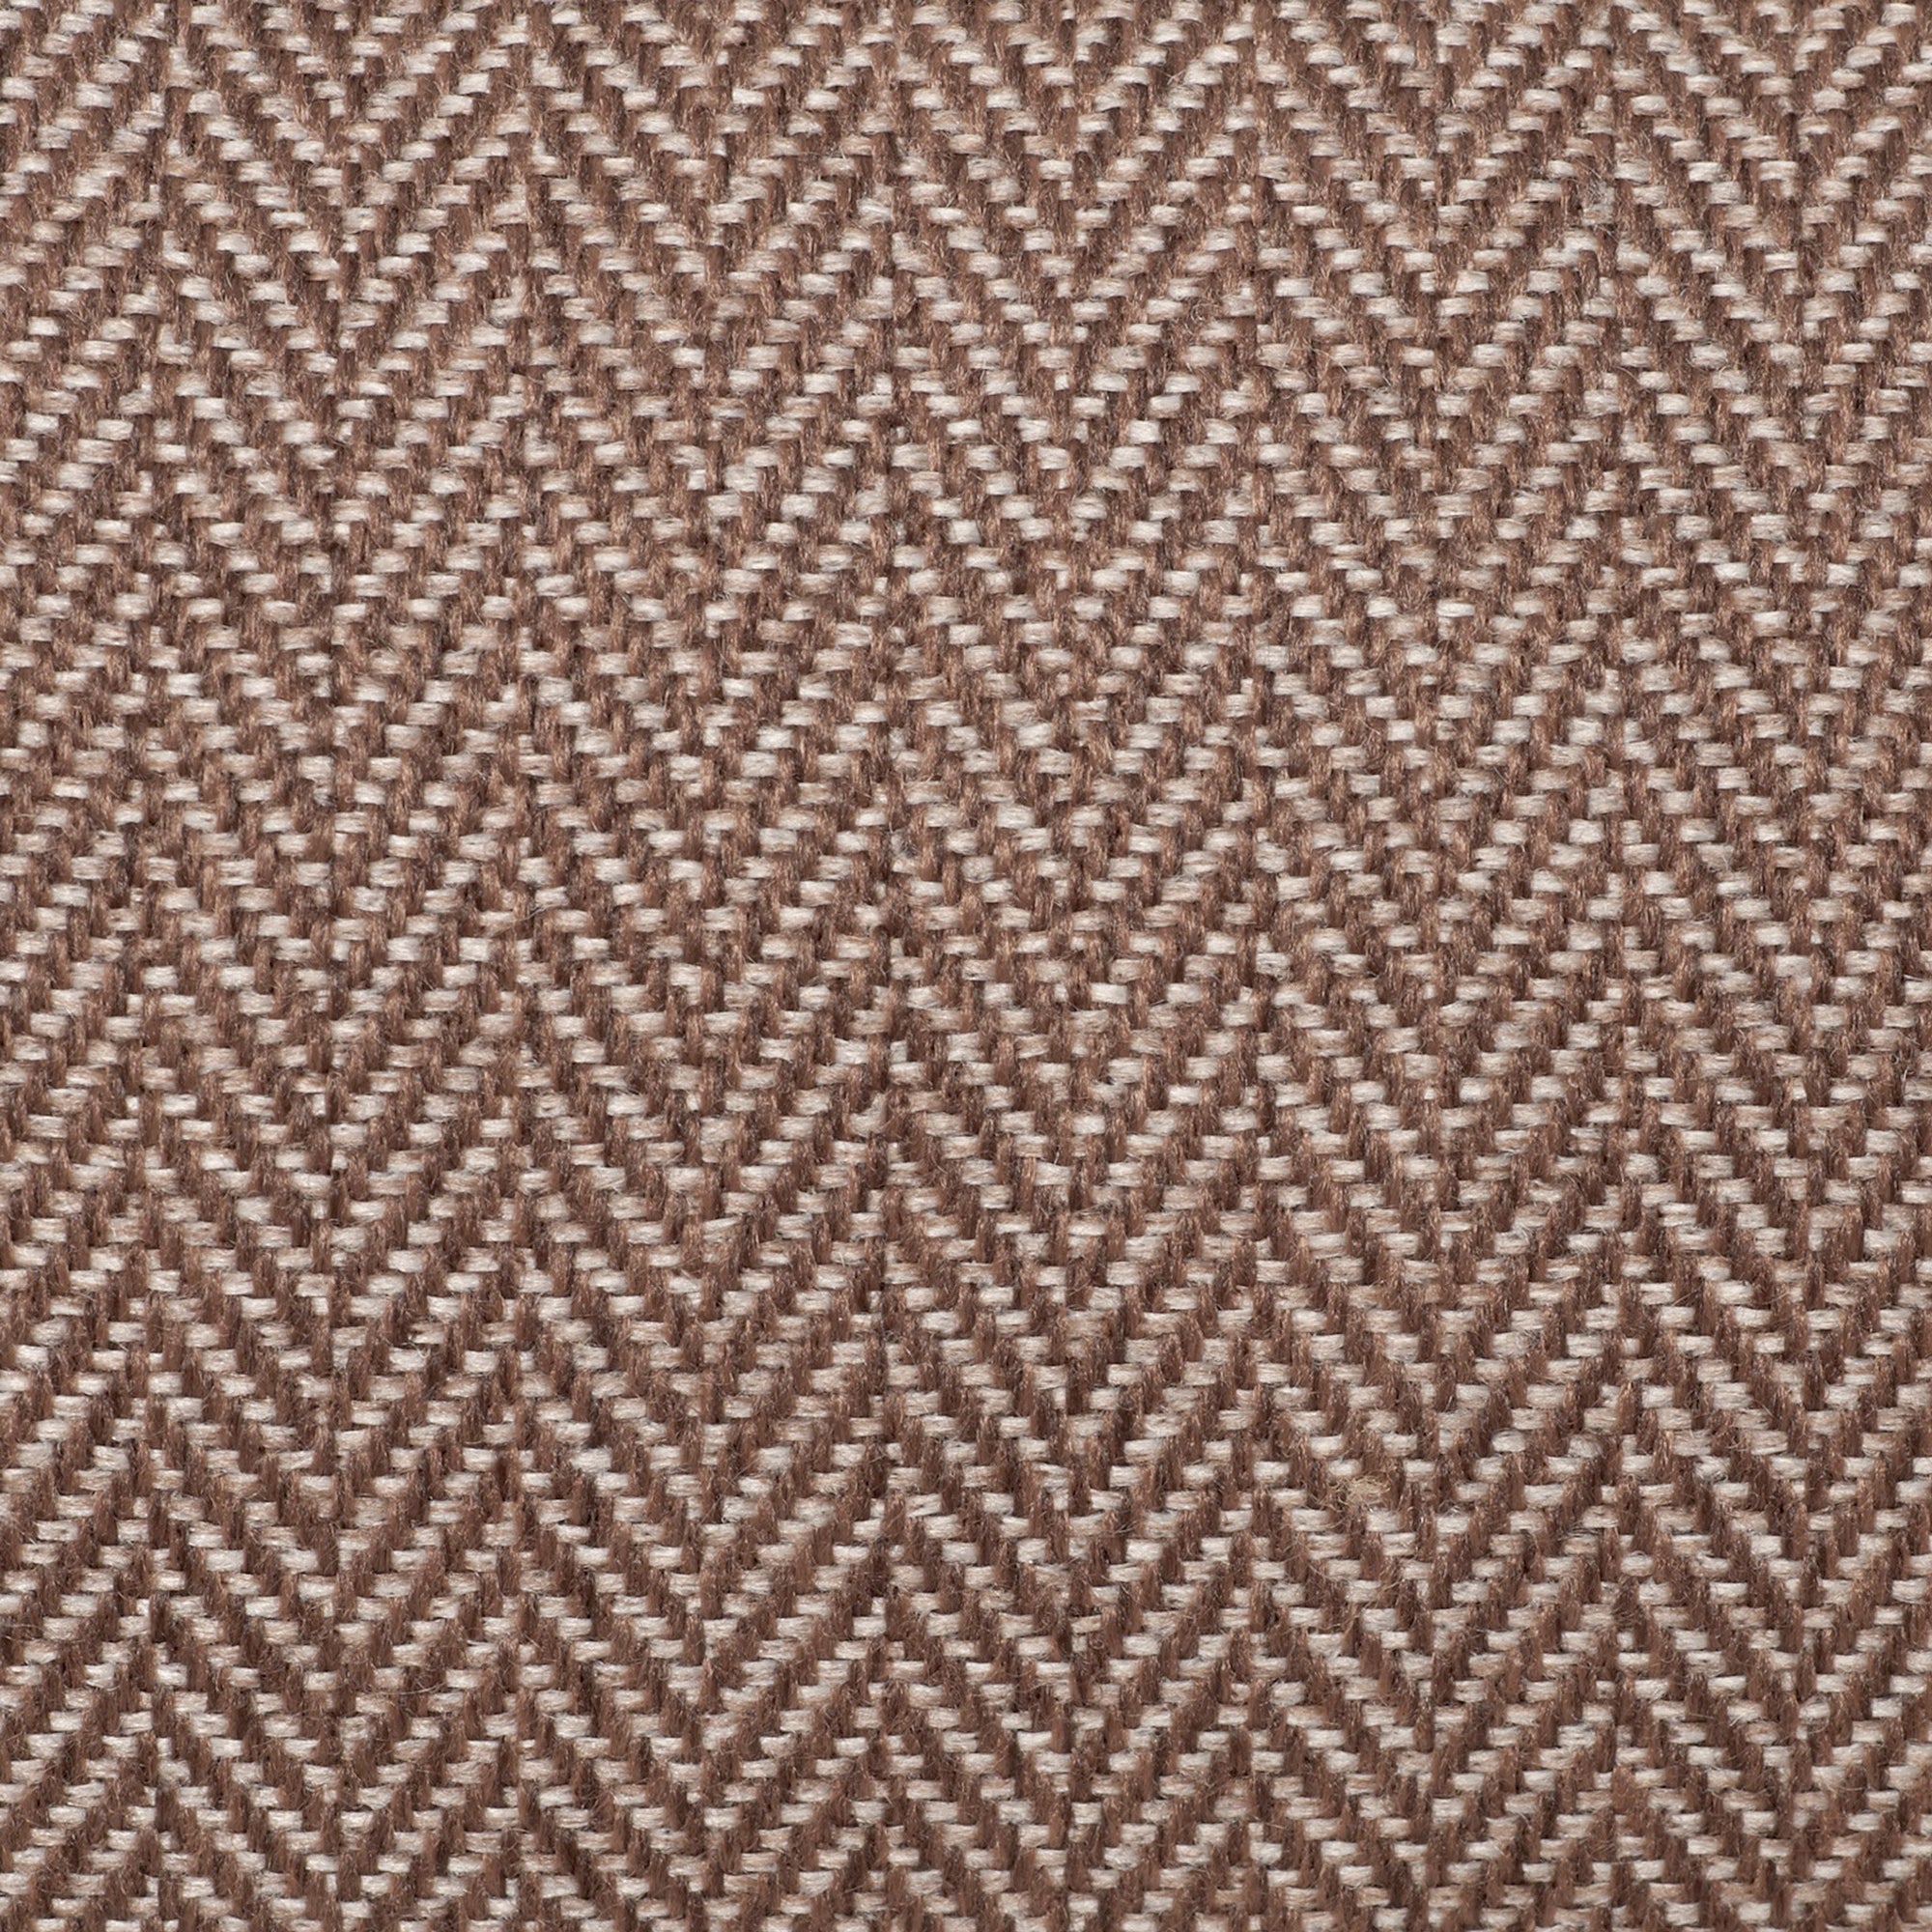 KONA CAVE® designer bolster dog bed in brown herringbone fabric is stylish and cozy fabric. Close up of elegant fabric.